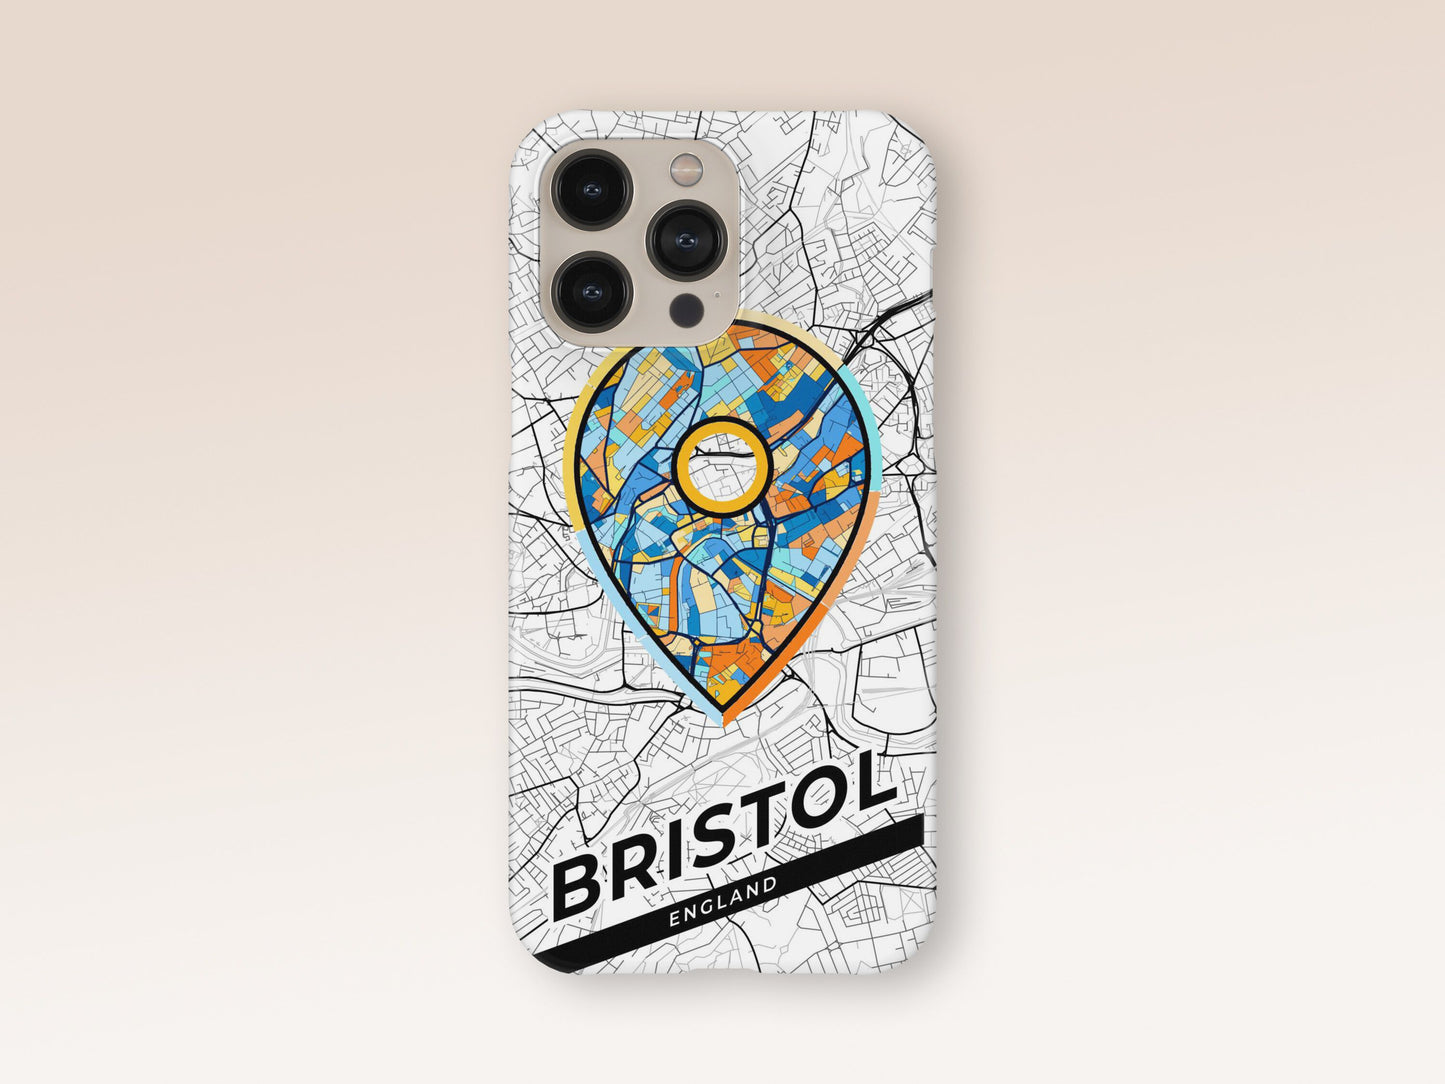 Bristol England slim phone case with colorful icon. Birthday, wedding or housewarming gift. Couple match cases. 1